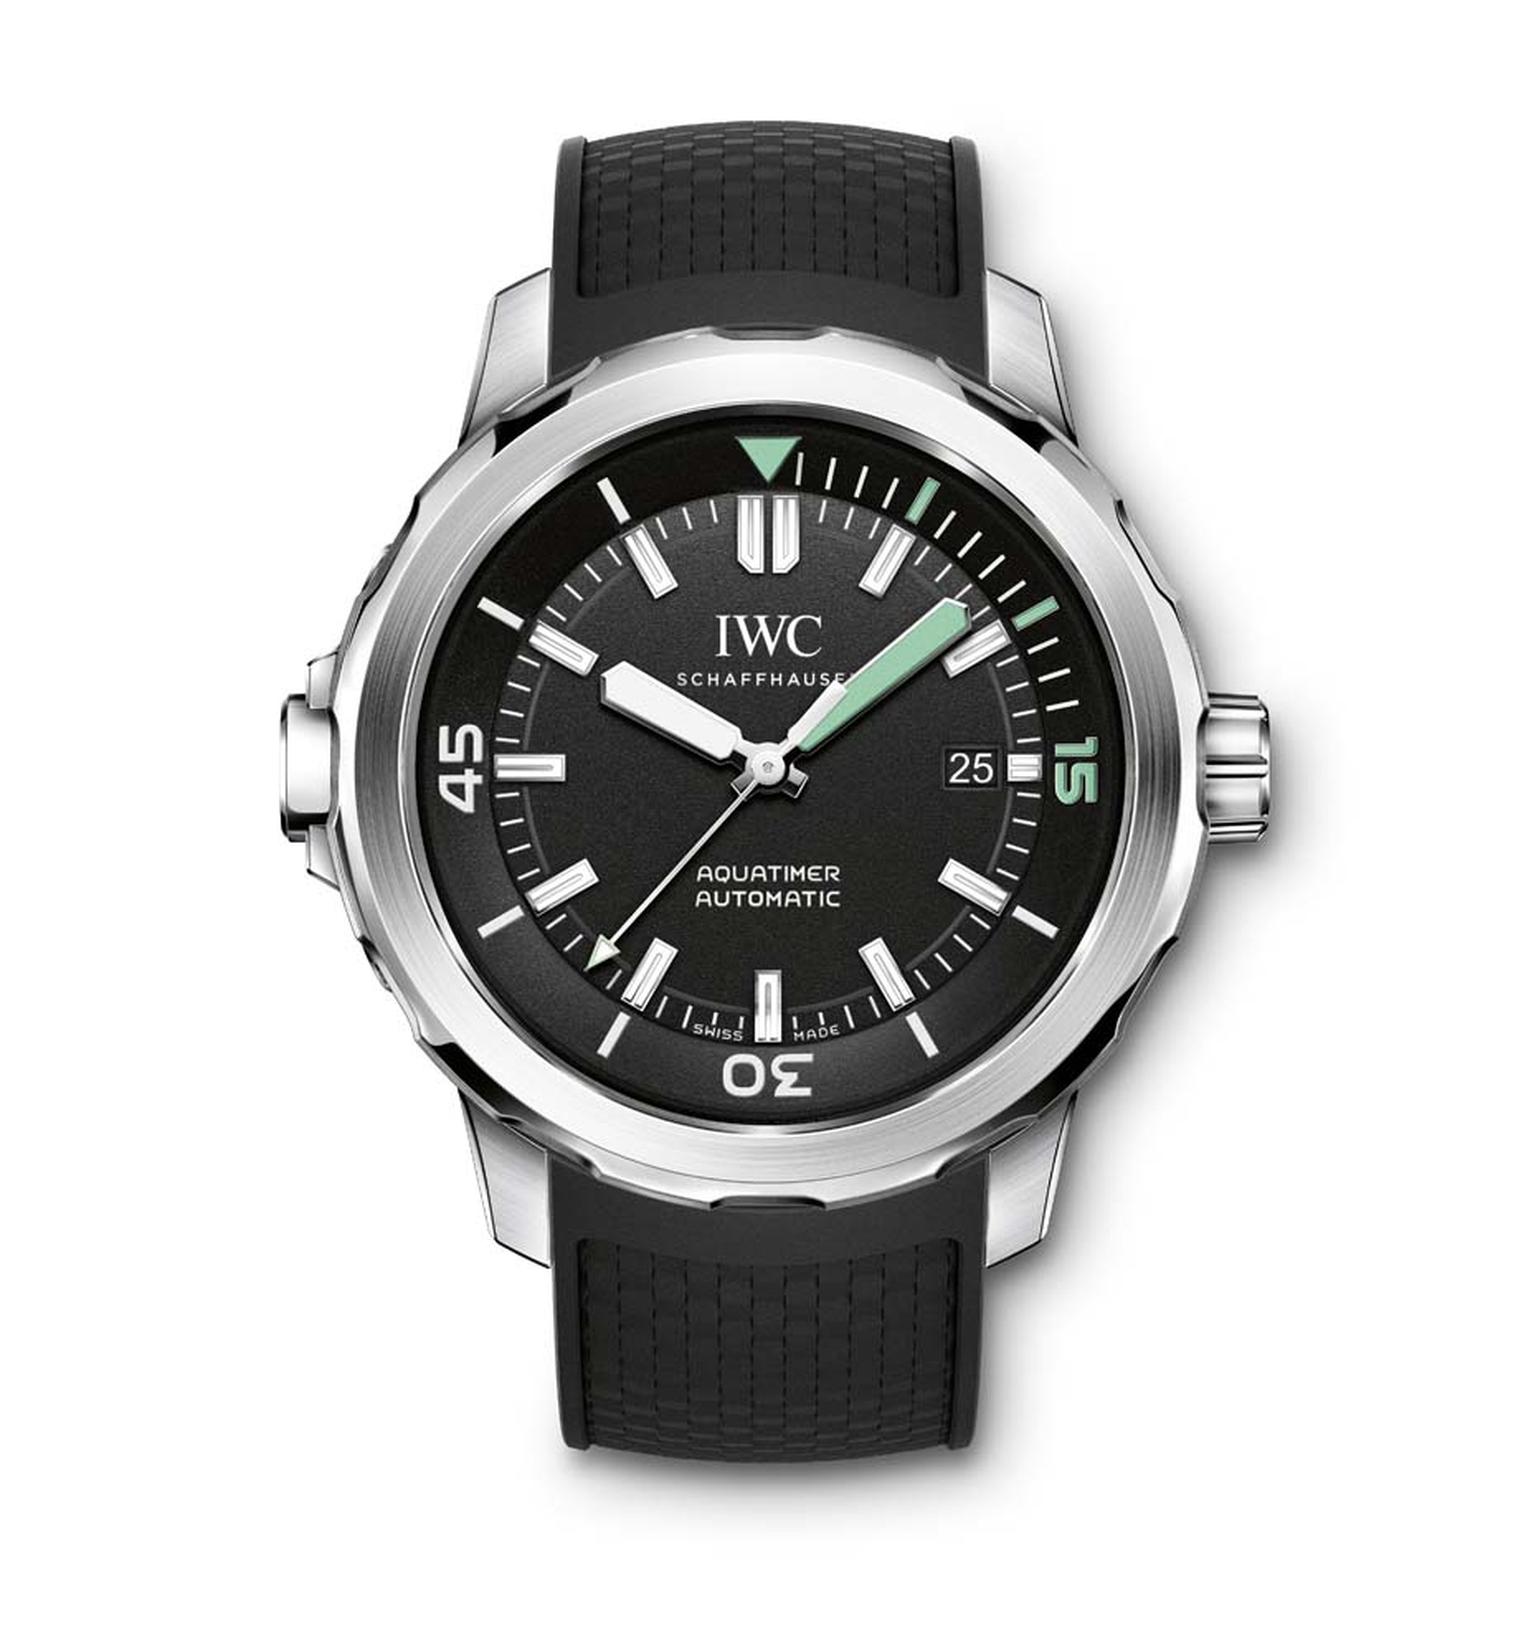 The IWC Aquatimer Automatic is a serious dive watch with just three hands for optimal legibility. The 42mm stainless steel case features IWC watches innovative SafeDive system on both the external and interior bezels (£4,250). Available from Wempe, 43-44 